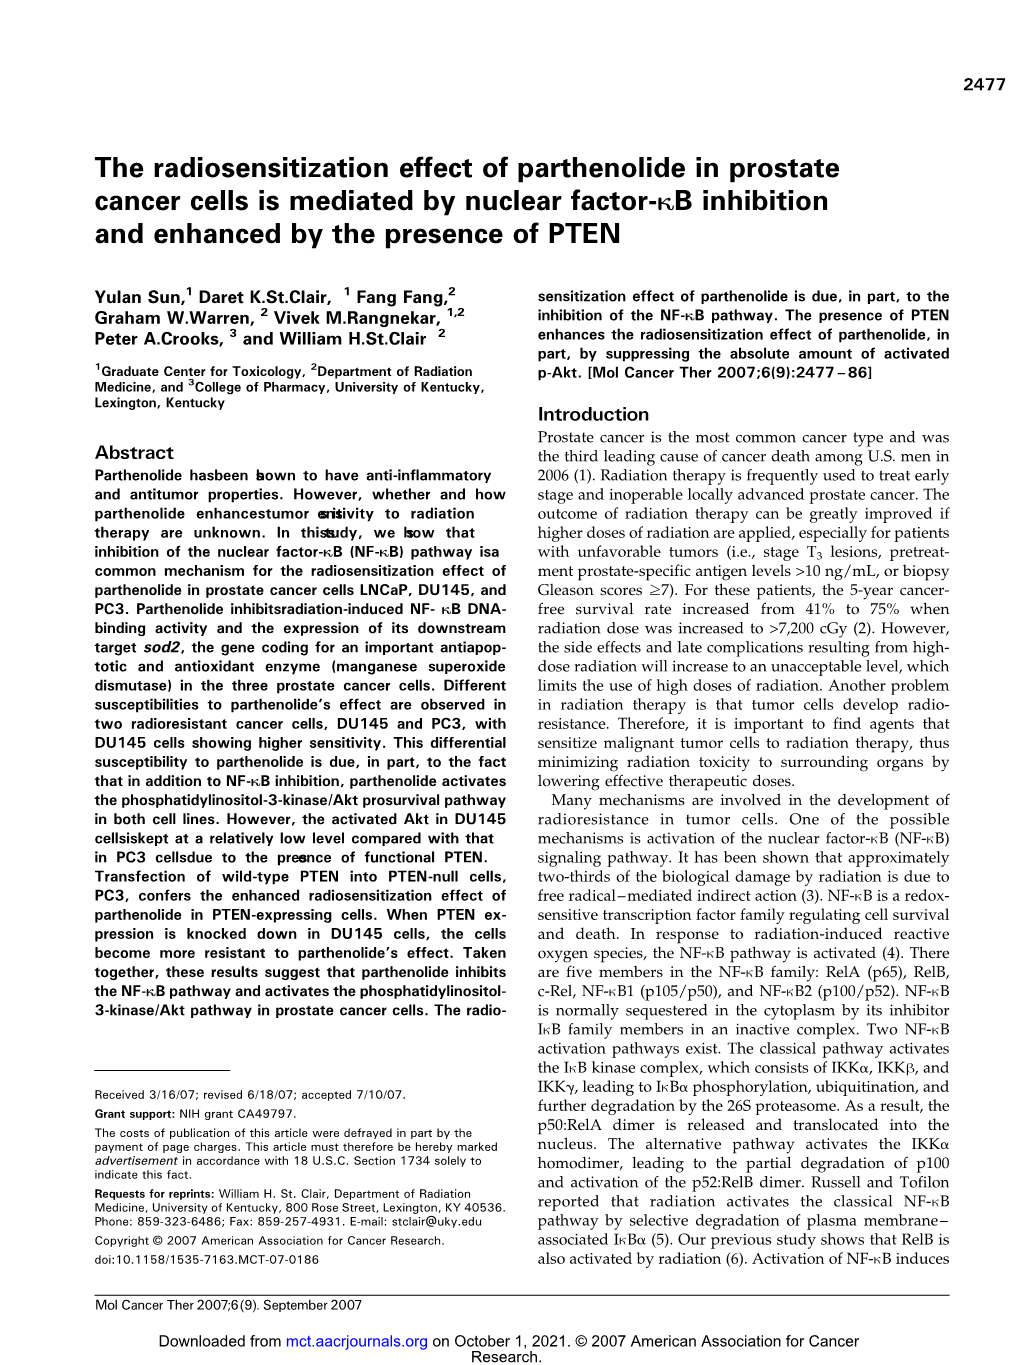 The Radiosensitization Effect of Parthenolide in Prostate Cancer Cells Is Mediated by Nuclear Factor-KB Inhibition and Enhanced by the Presence of PTEN